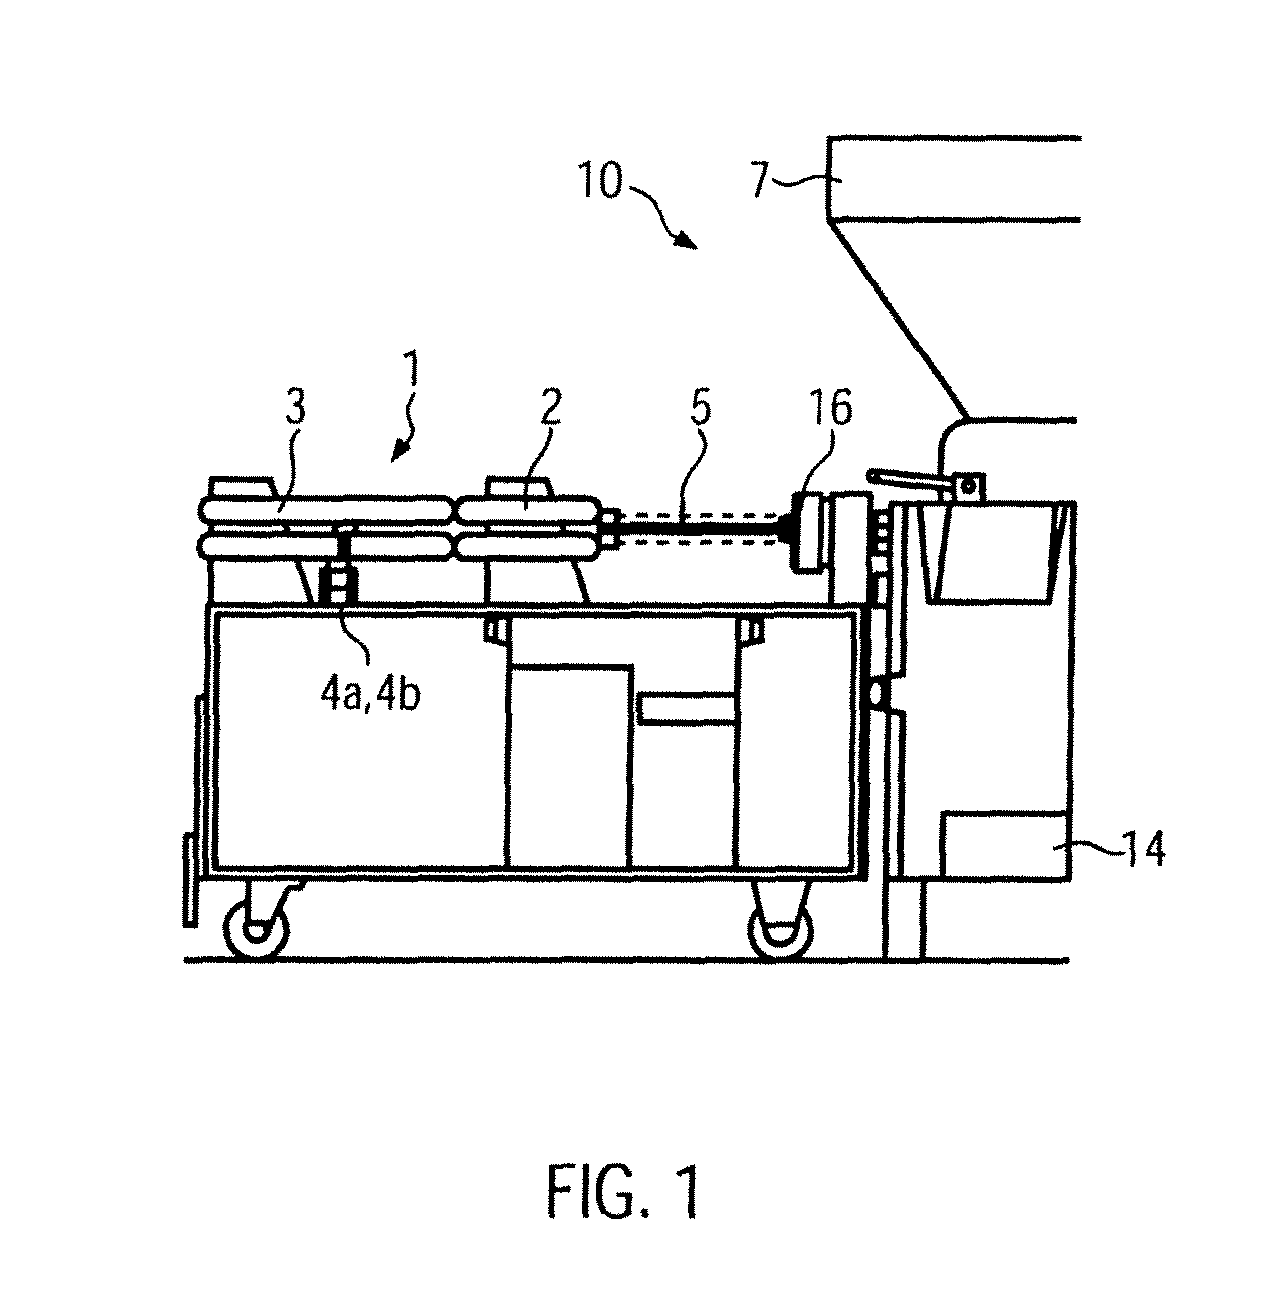 Device and method for parting sausage chains